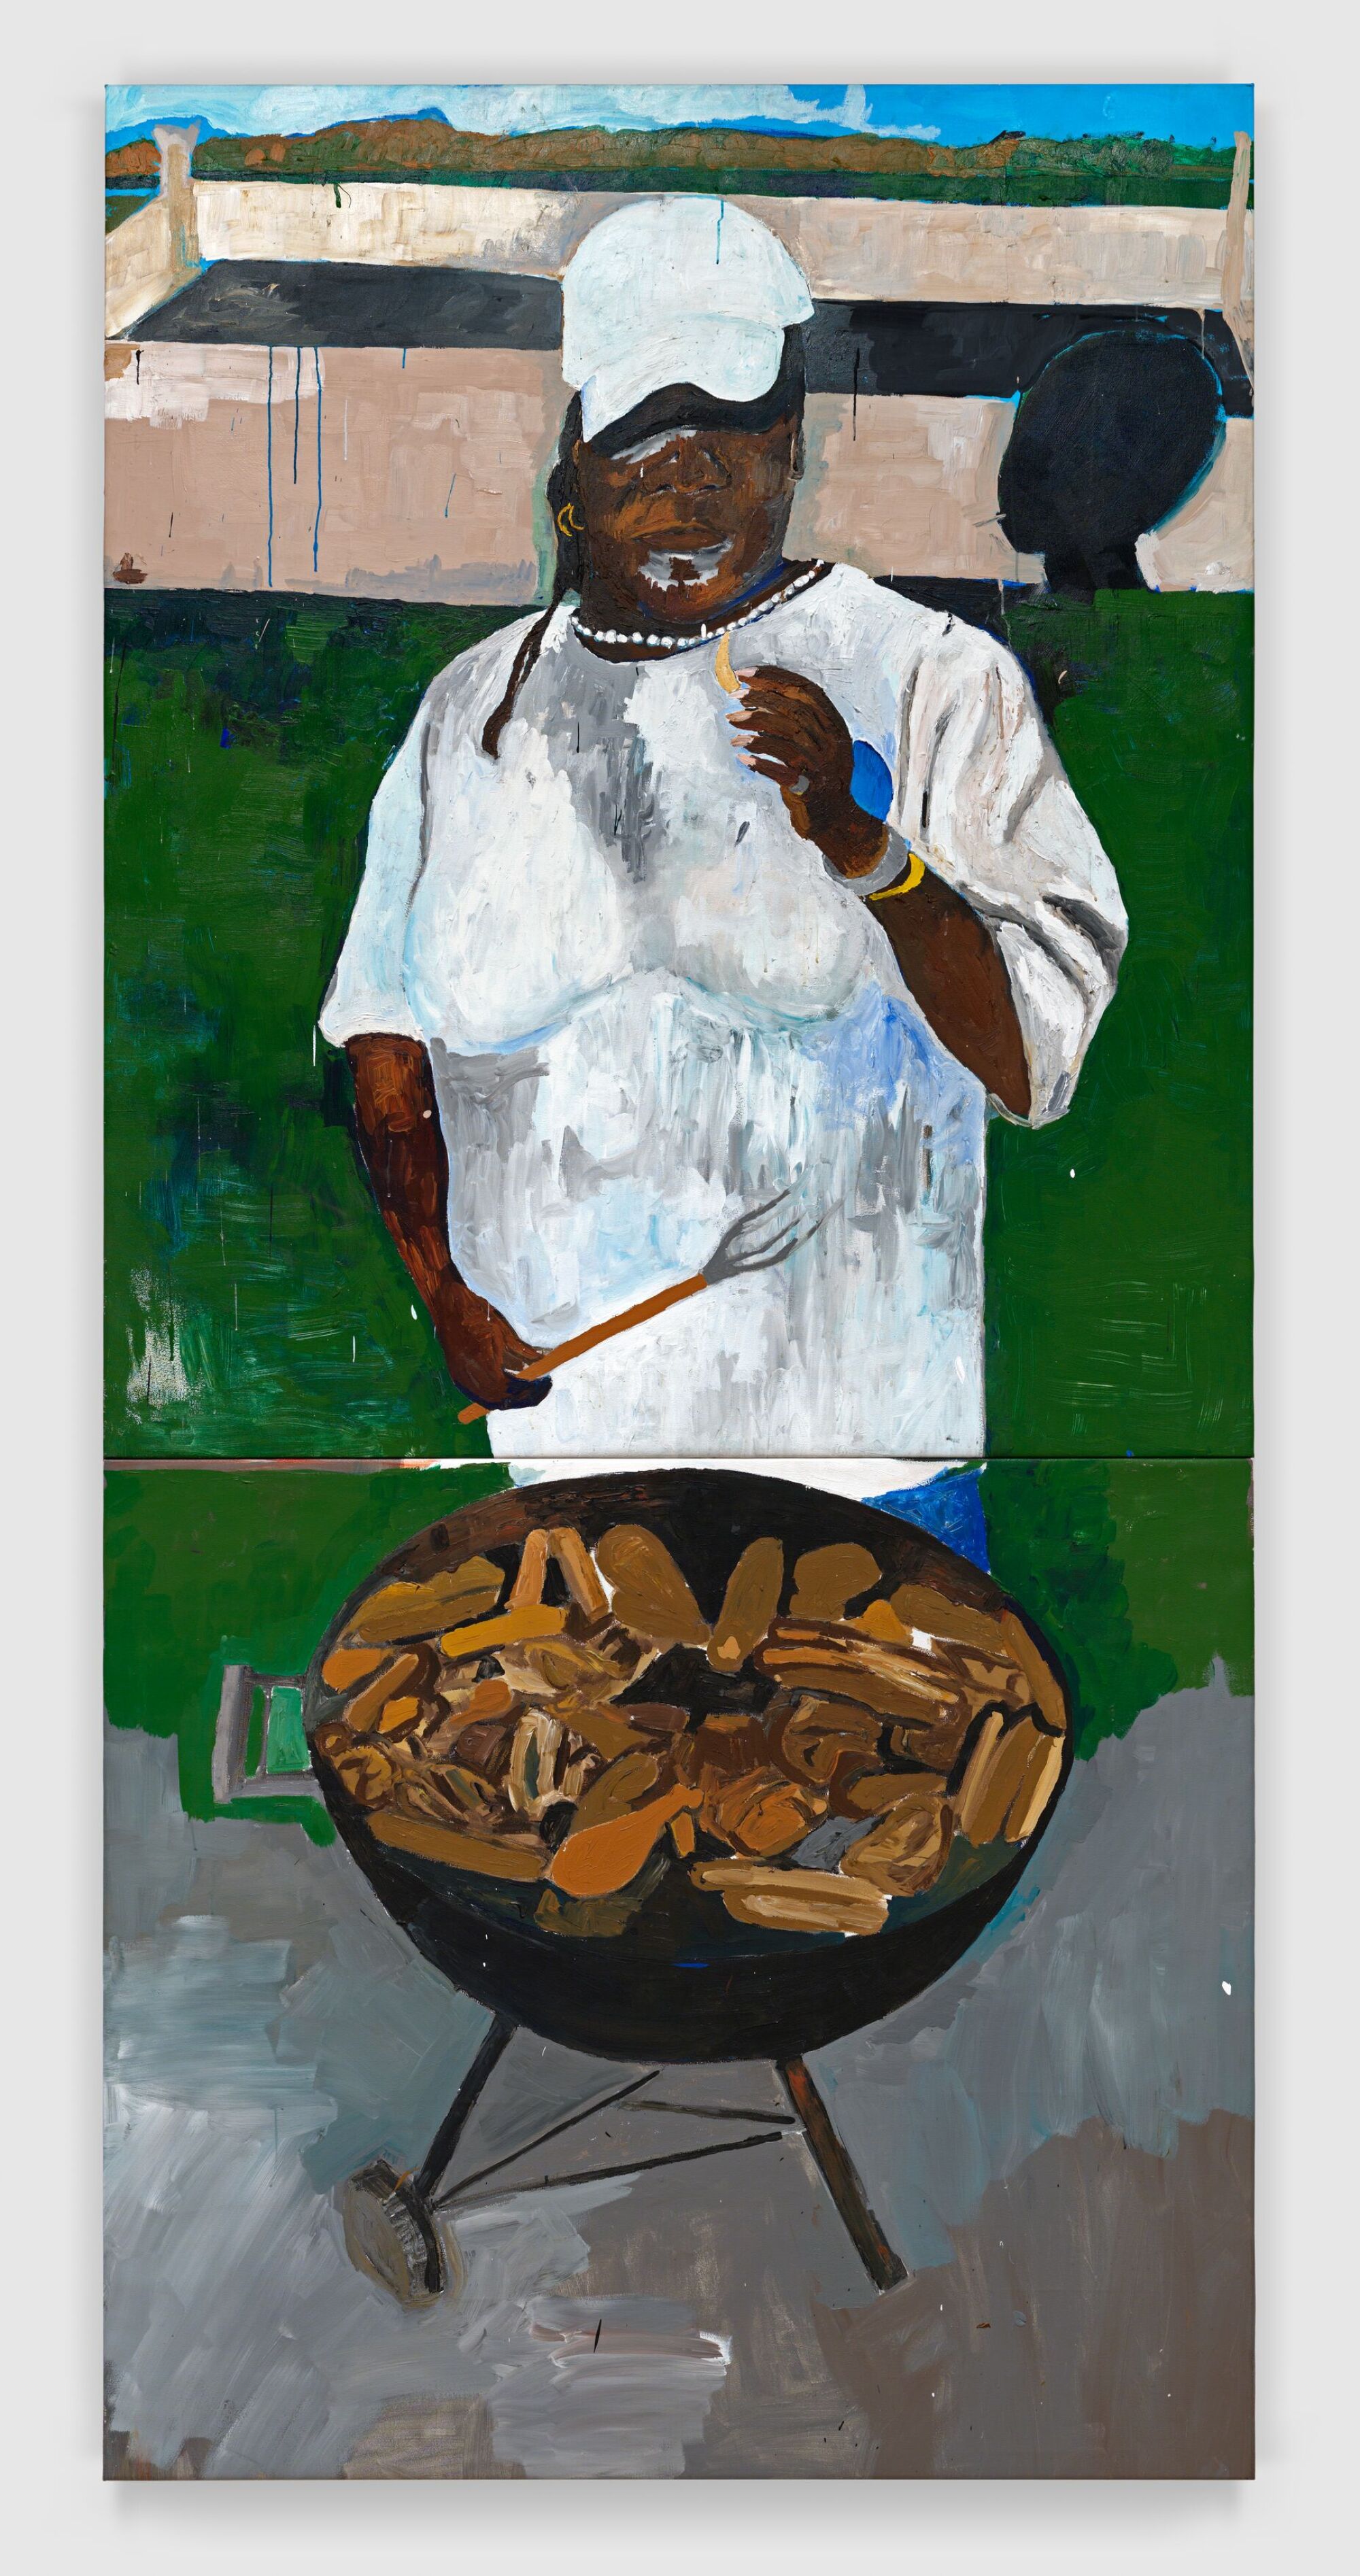 A vertical painting by Henry Taylor shows a faceless figure barbecuing before a landscape that resembles a prison yard. 